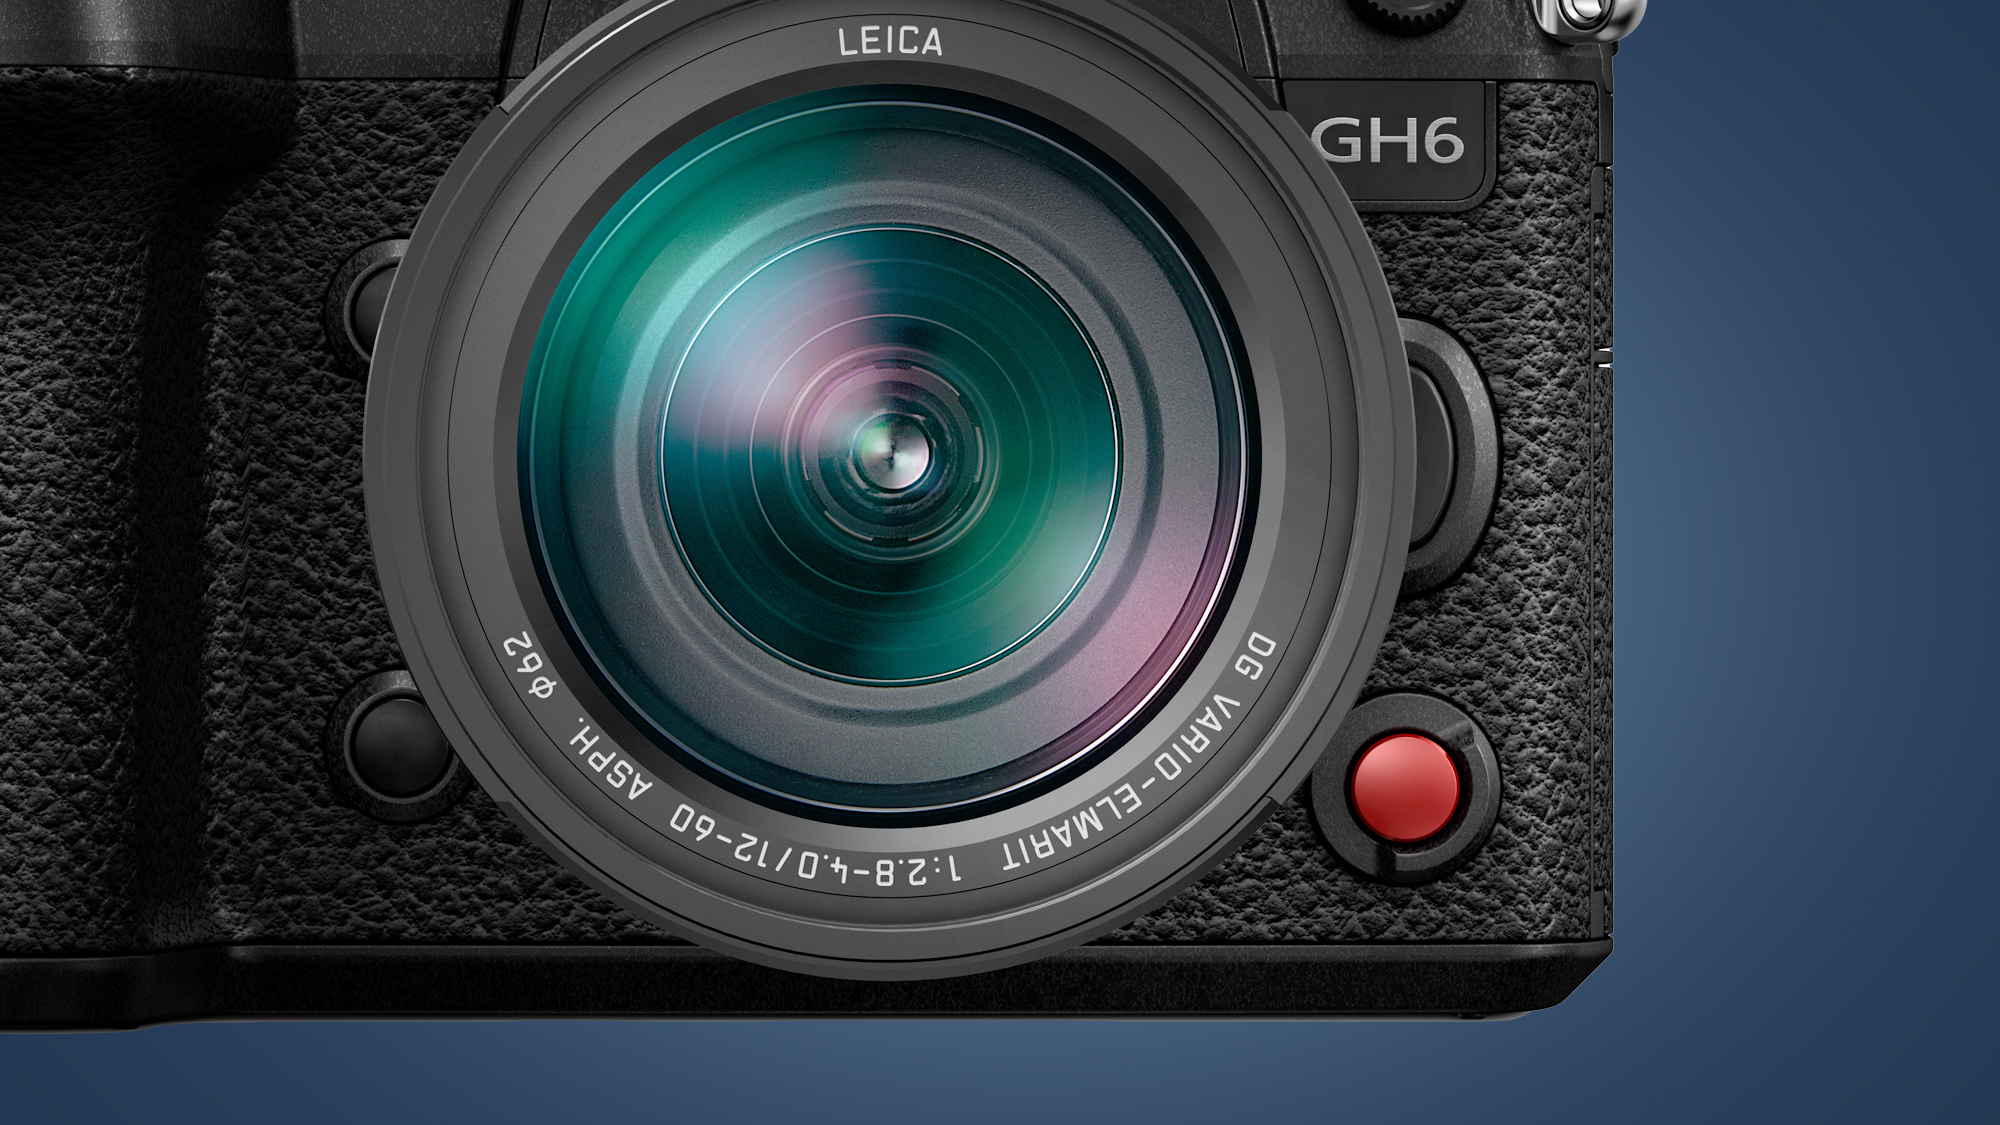 The front of the Panasonic GH6 camera